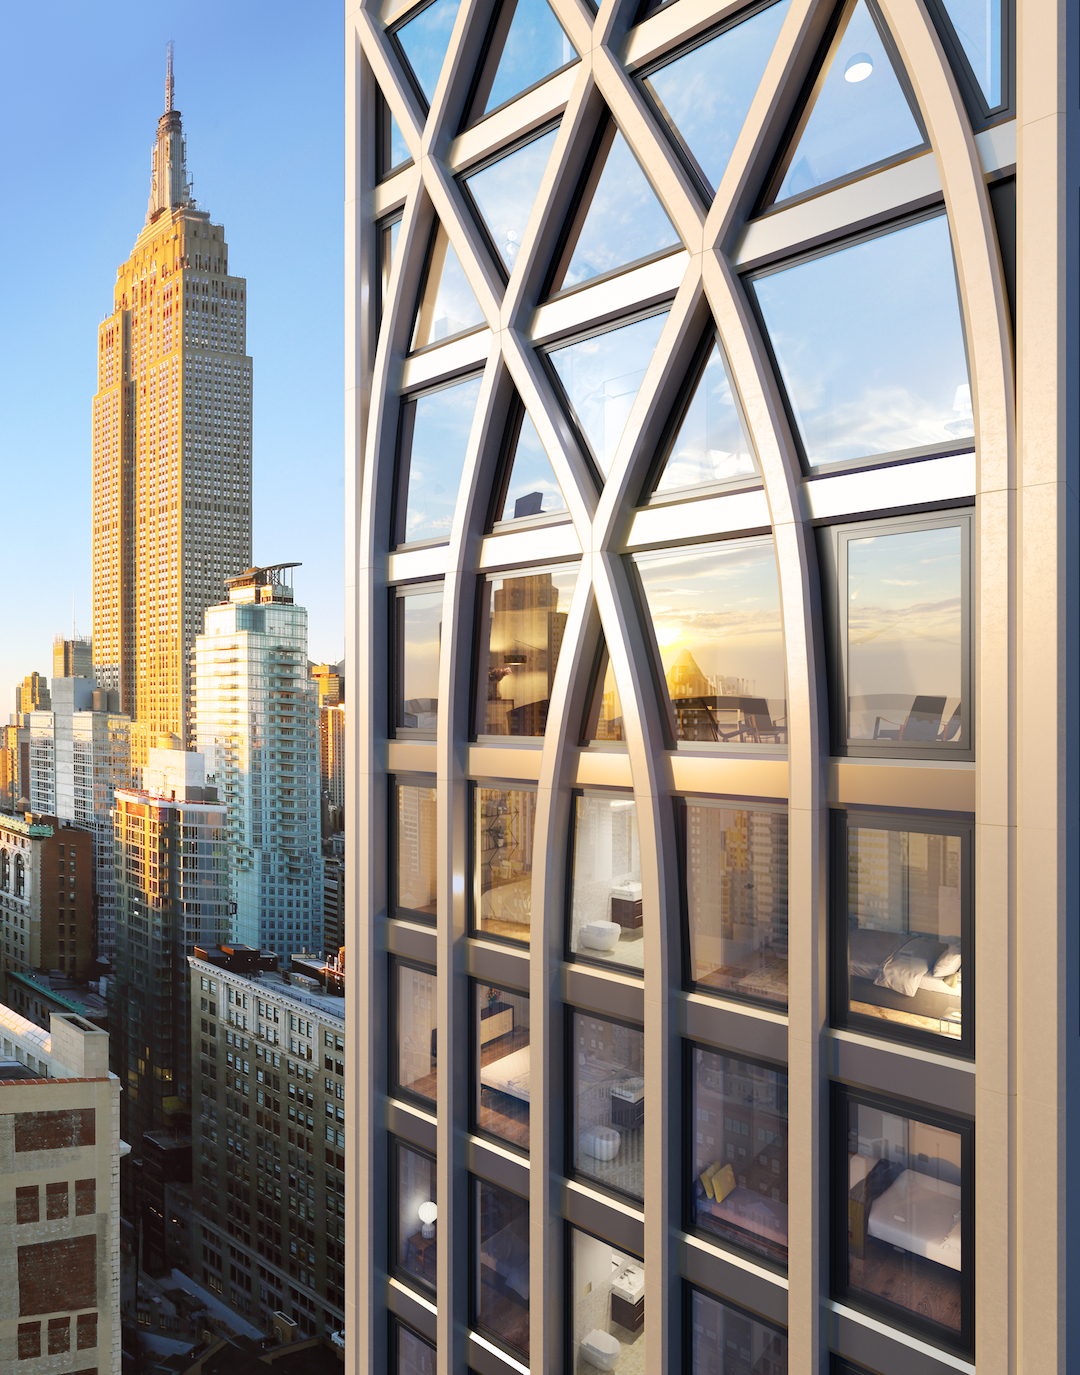 GEA Projects in the News: New Renderings Revealed of 30 East 31st Street!